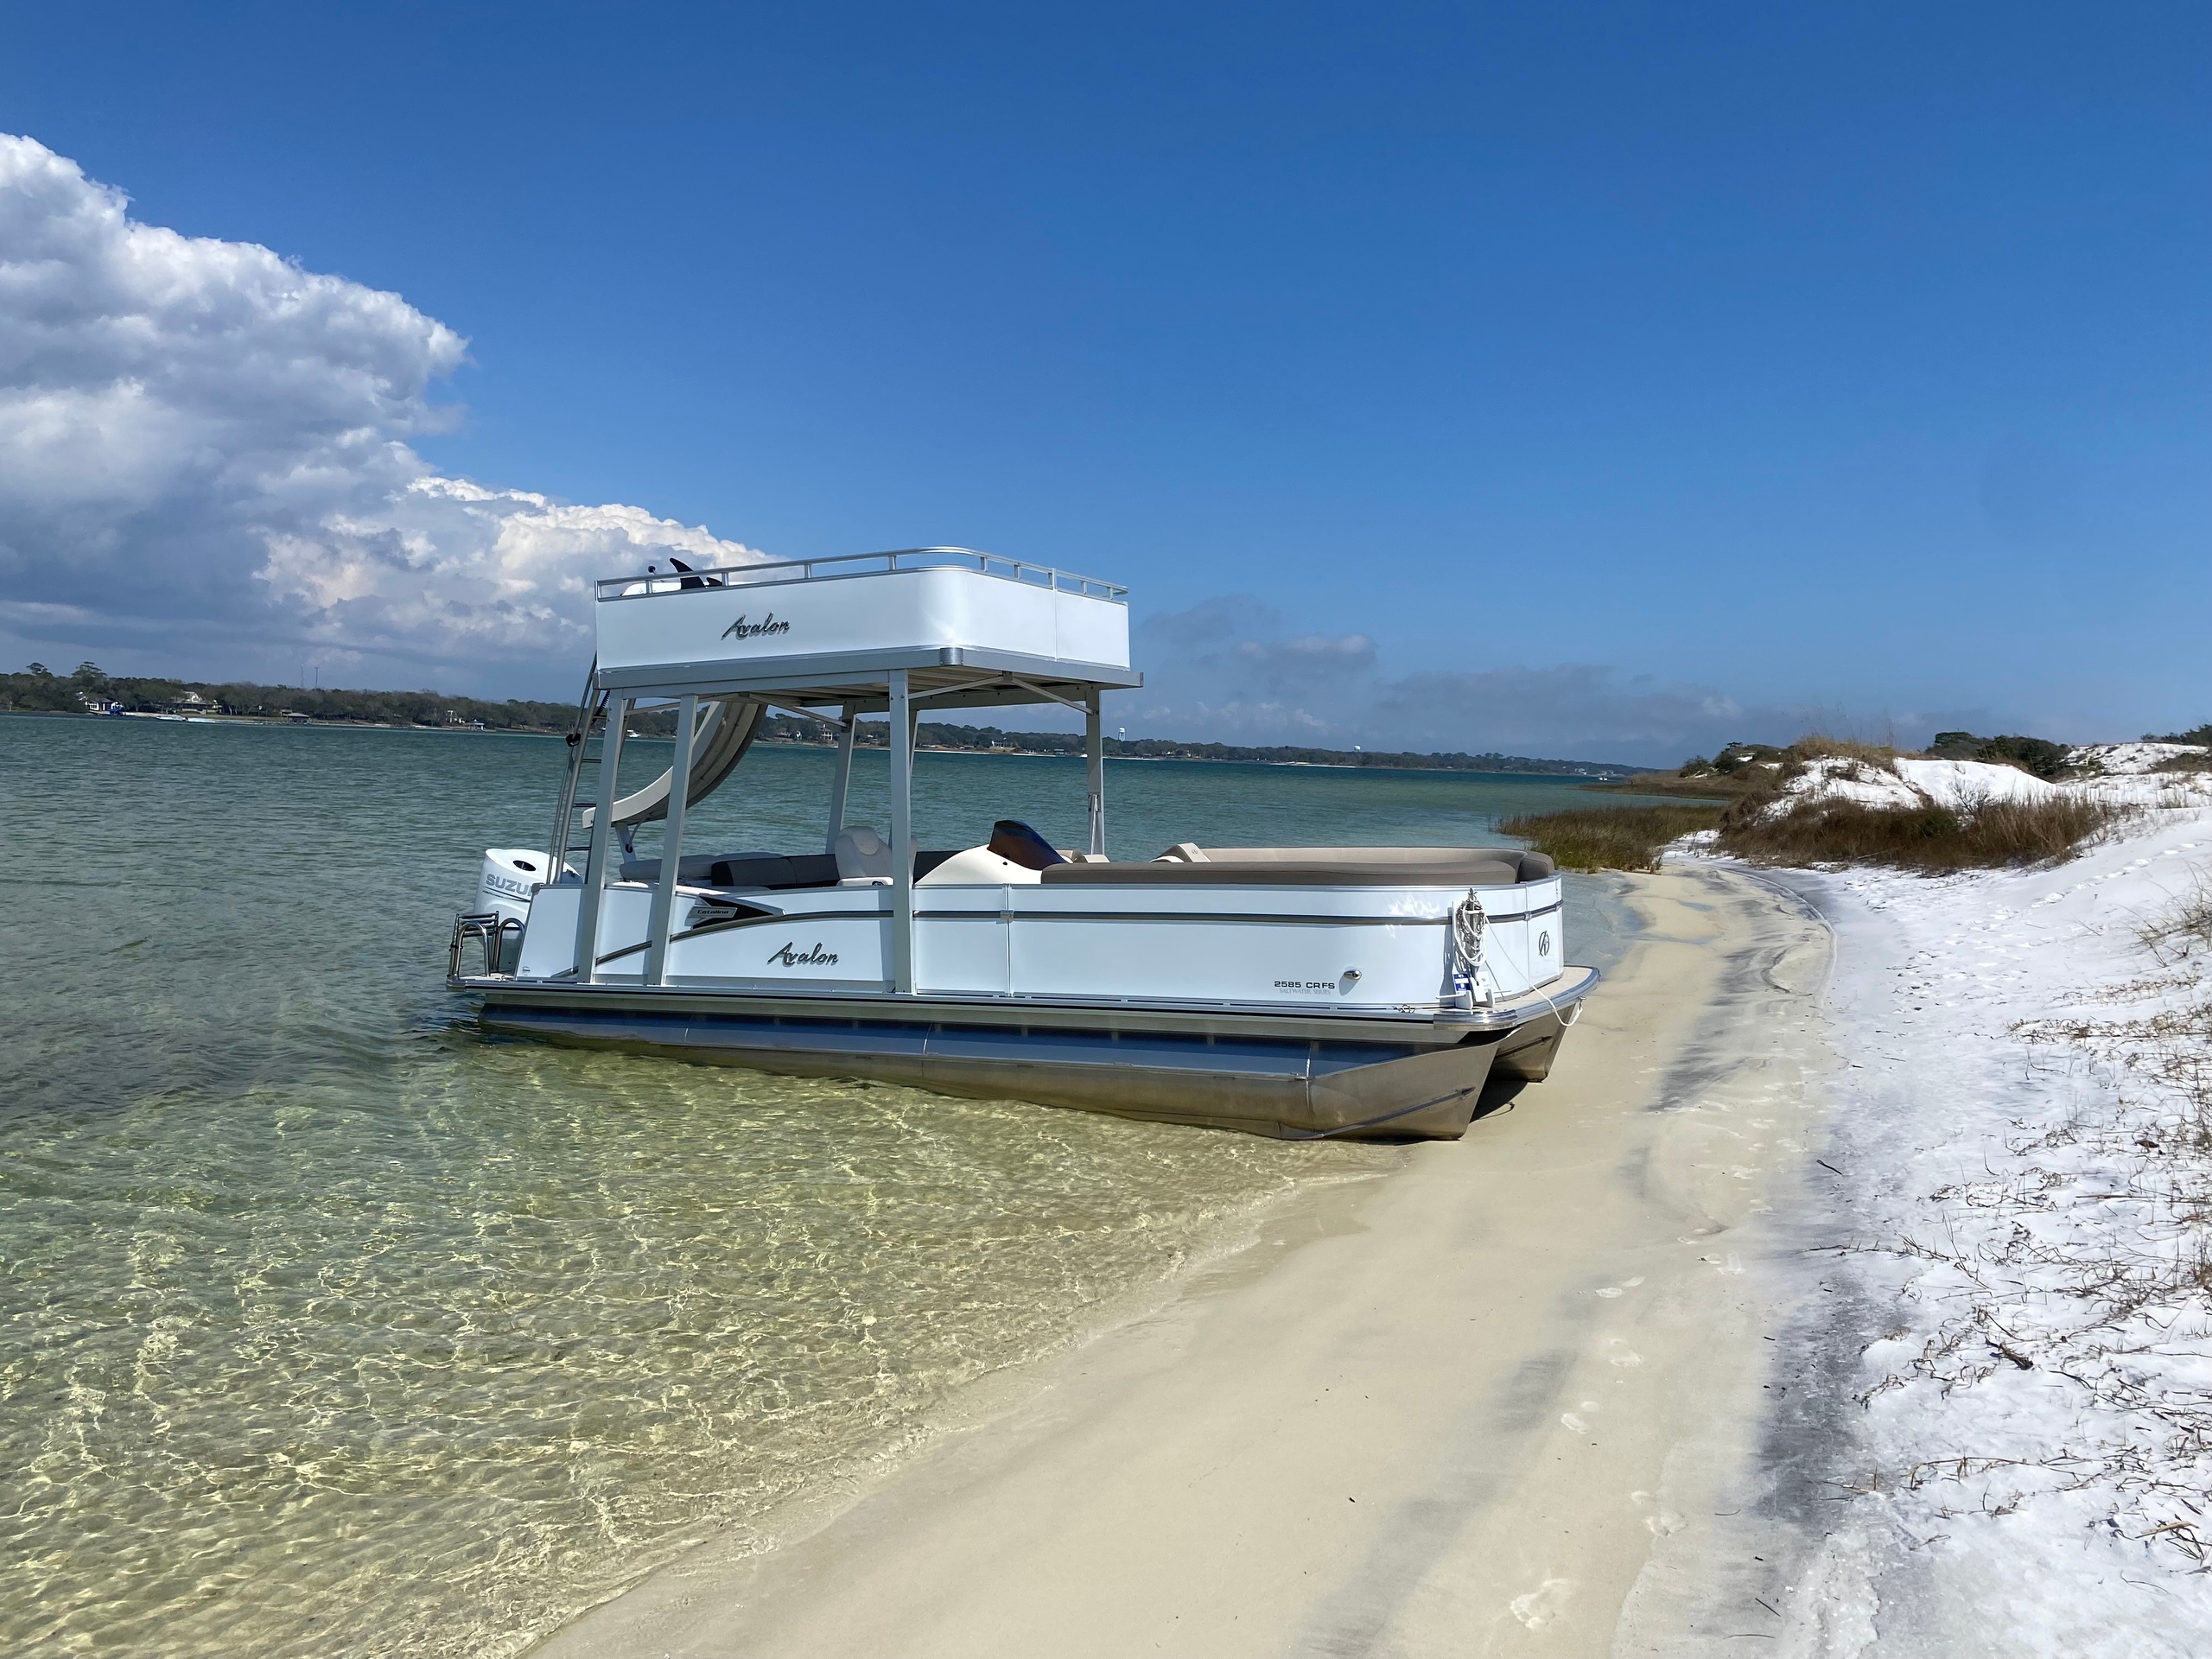 Private Pontoon Party for Up to 6 Guests with Captain, Waterslide, Snorkeling & More (2-4 Hours BYOB Charter) image 12